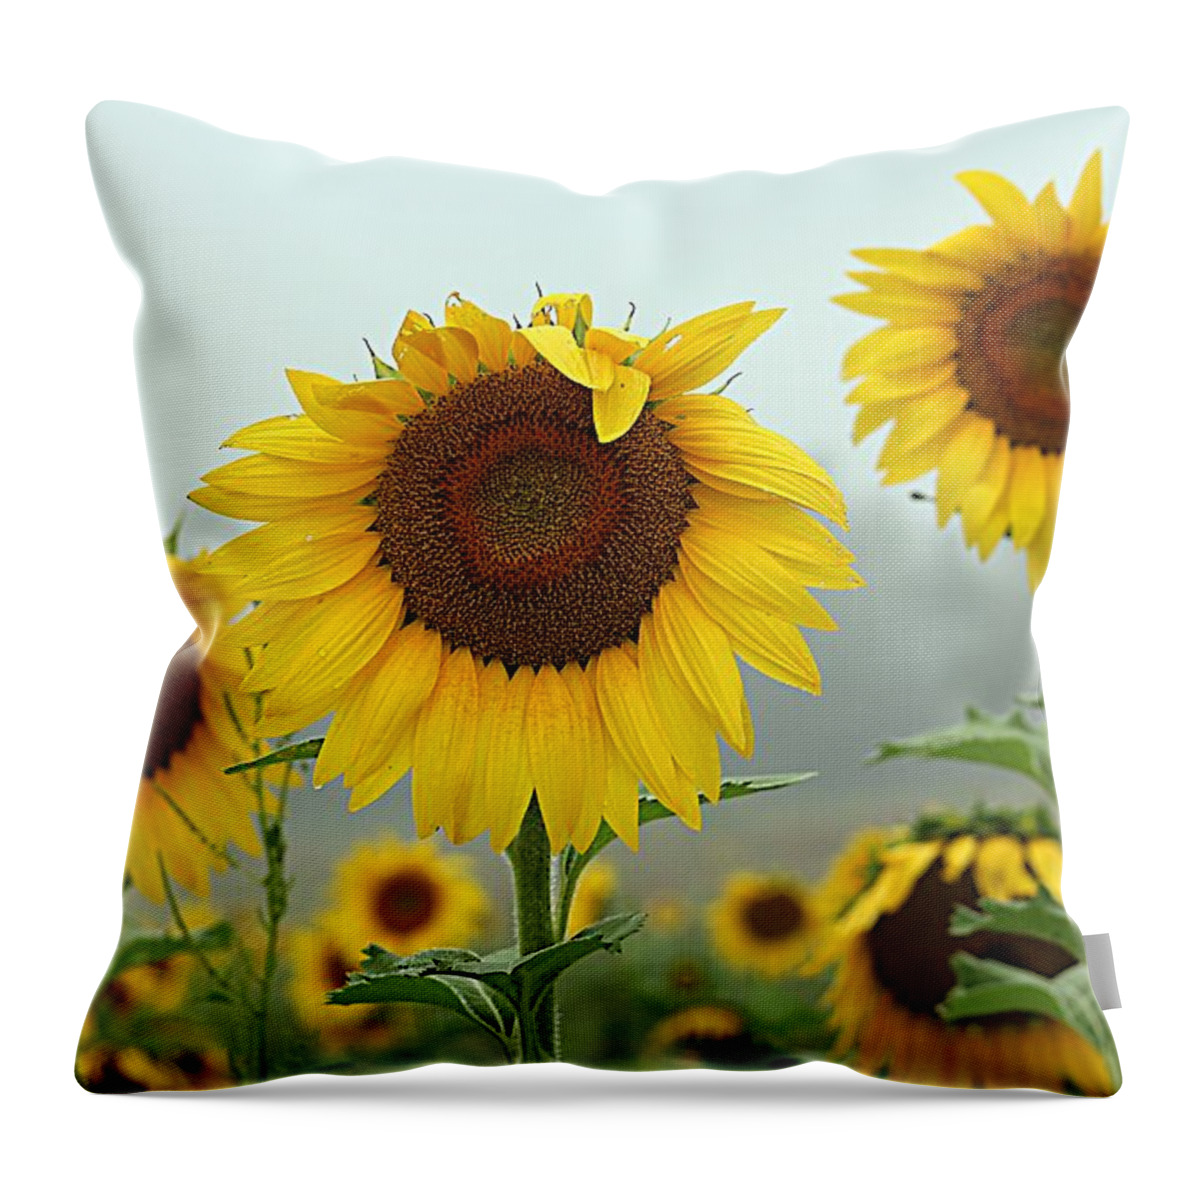 Three Sunflowers Throw Pillow featuring the photograph Three Amigos in a Field by Karen McKenzie McAdoo